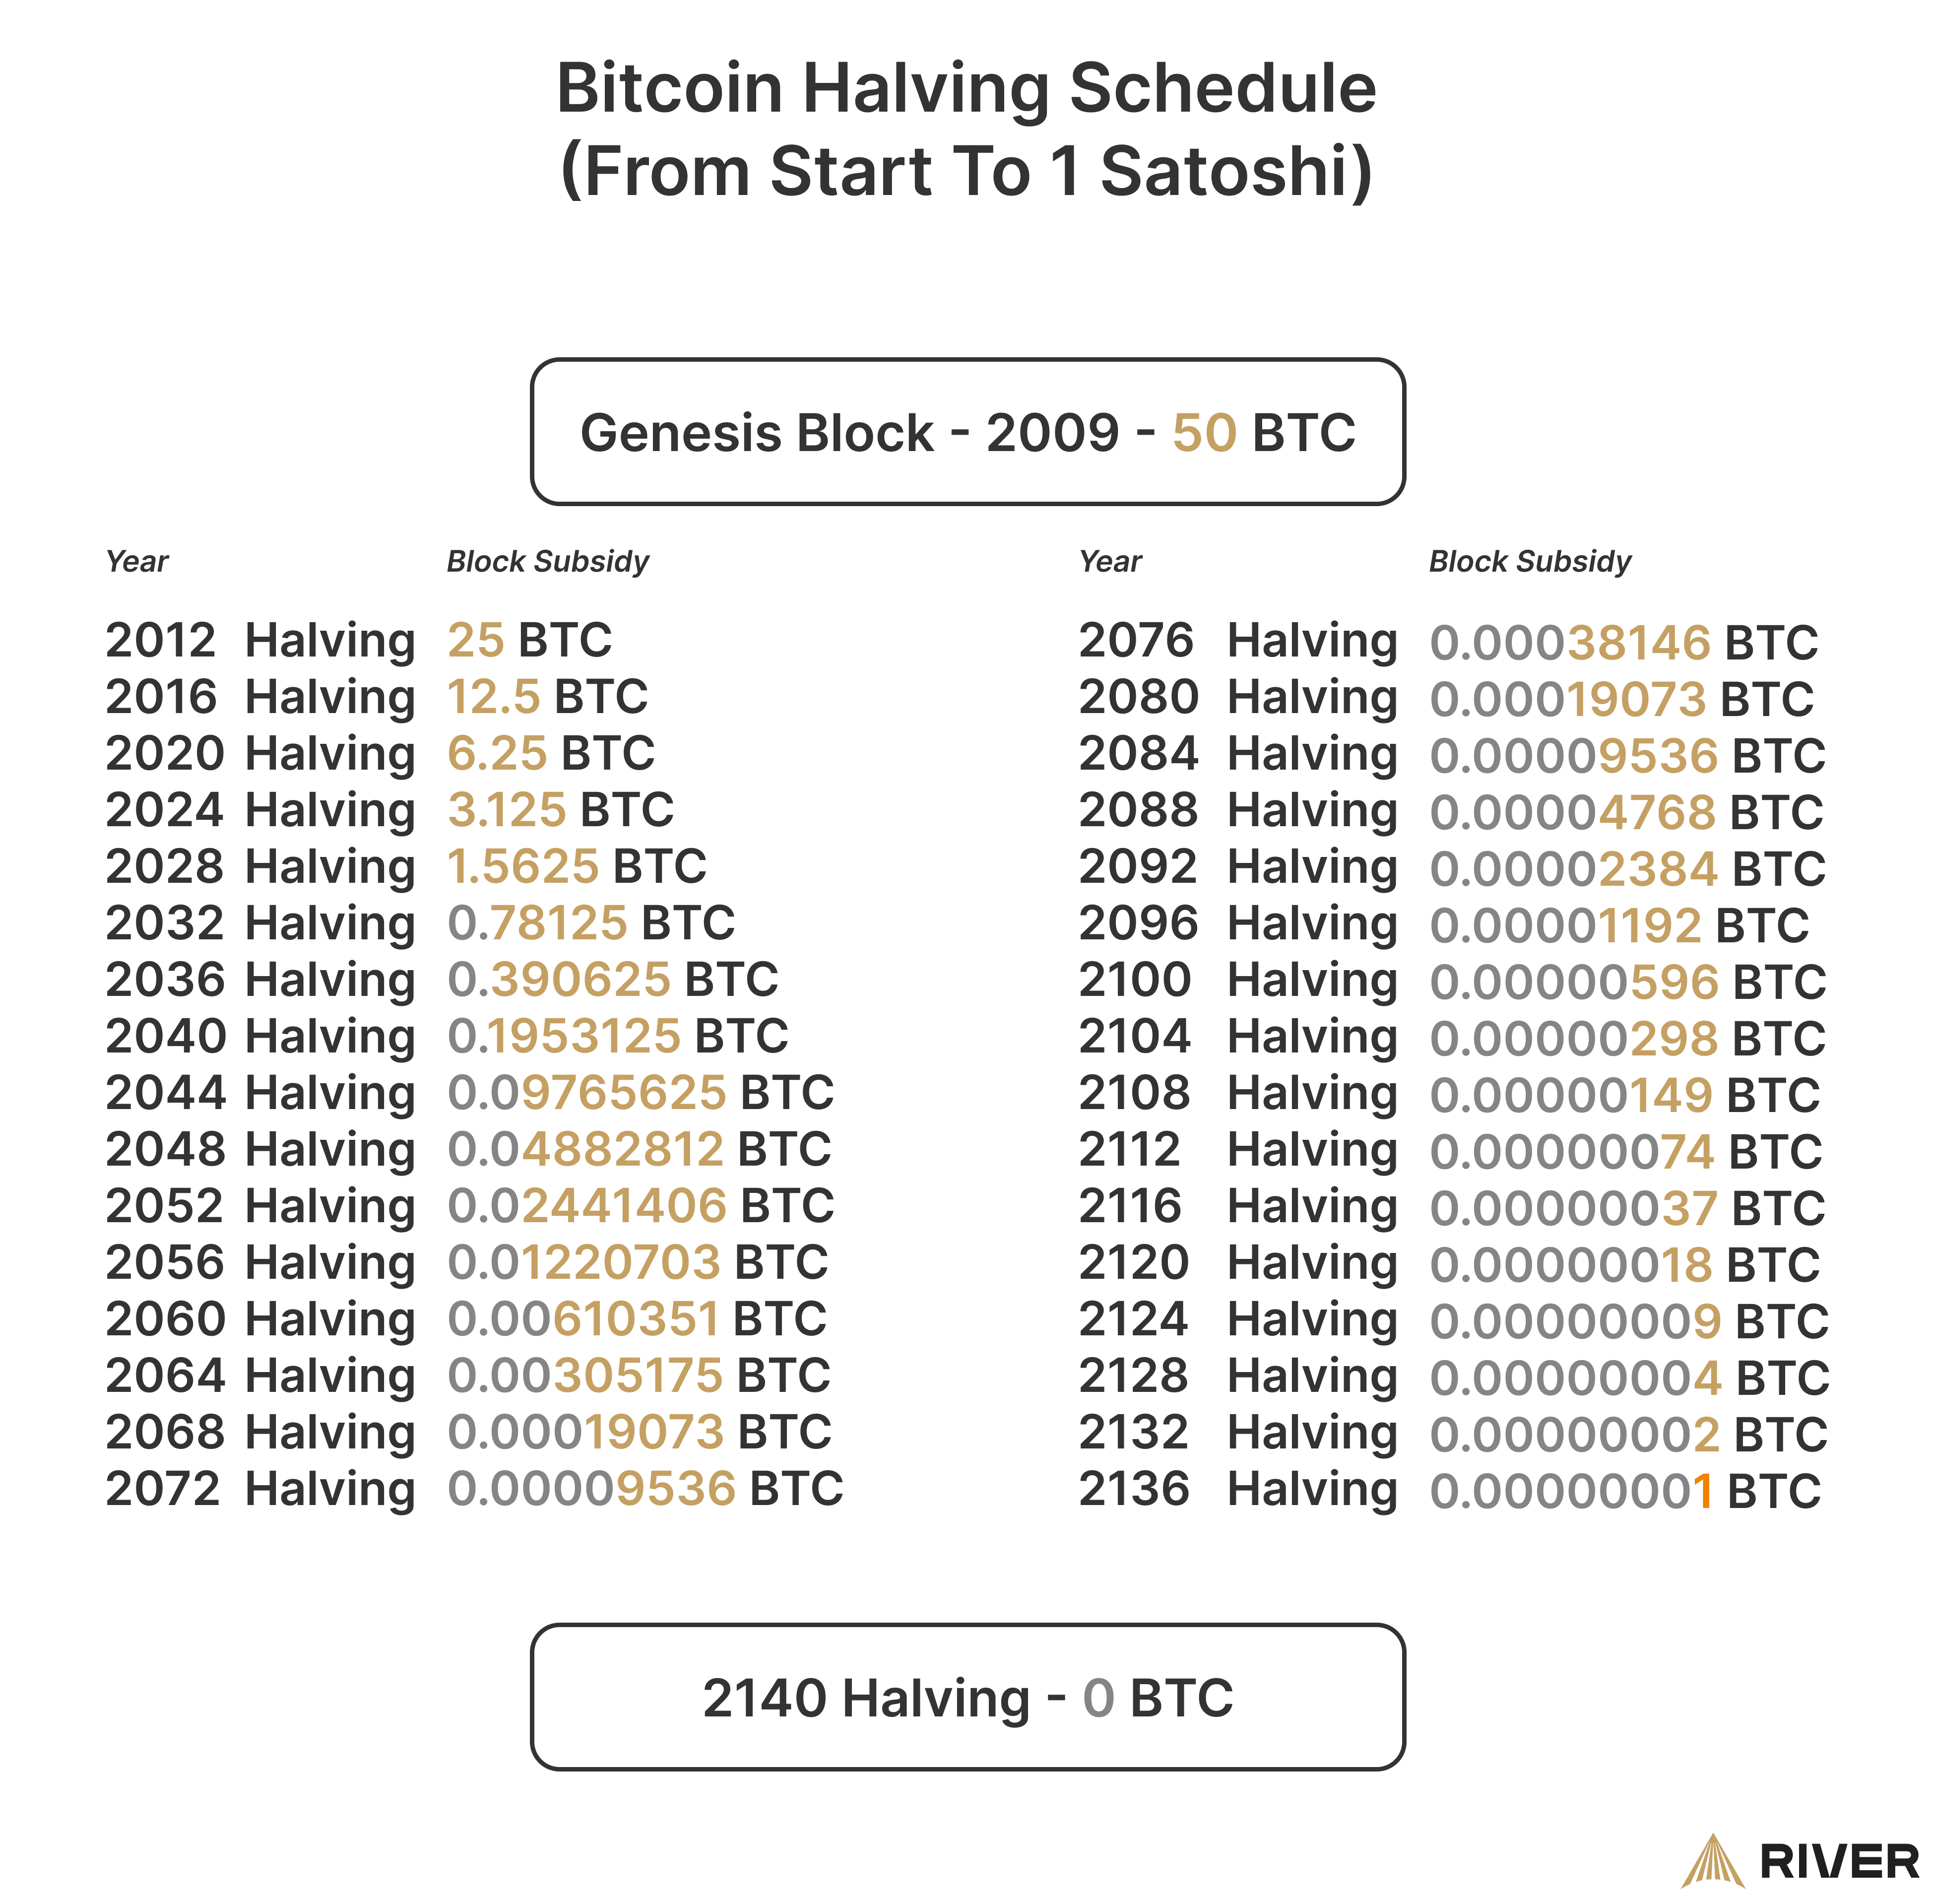 Bitcoin Halving Schedule chart depicting block reward reductions from 50 BTC in 2009 to 1 Satoshi, with halvings at intervals from 2012 to 2140